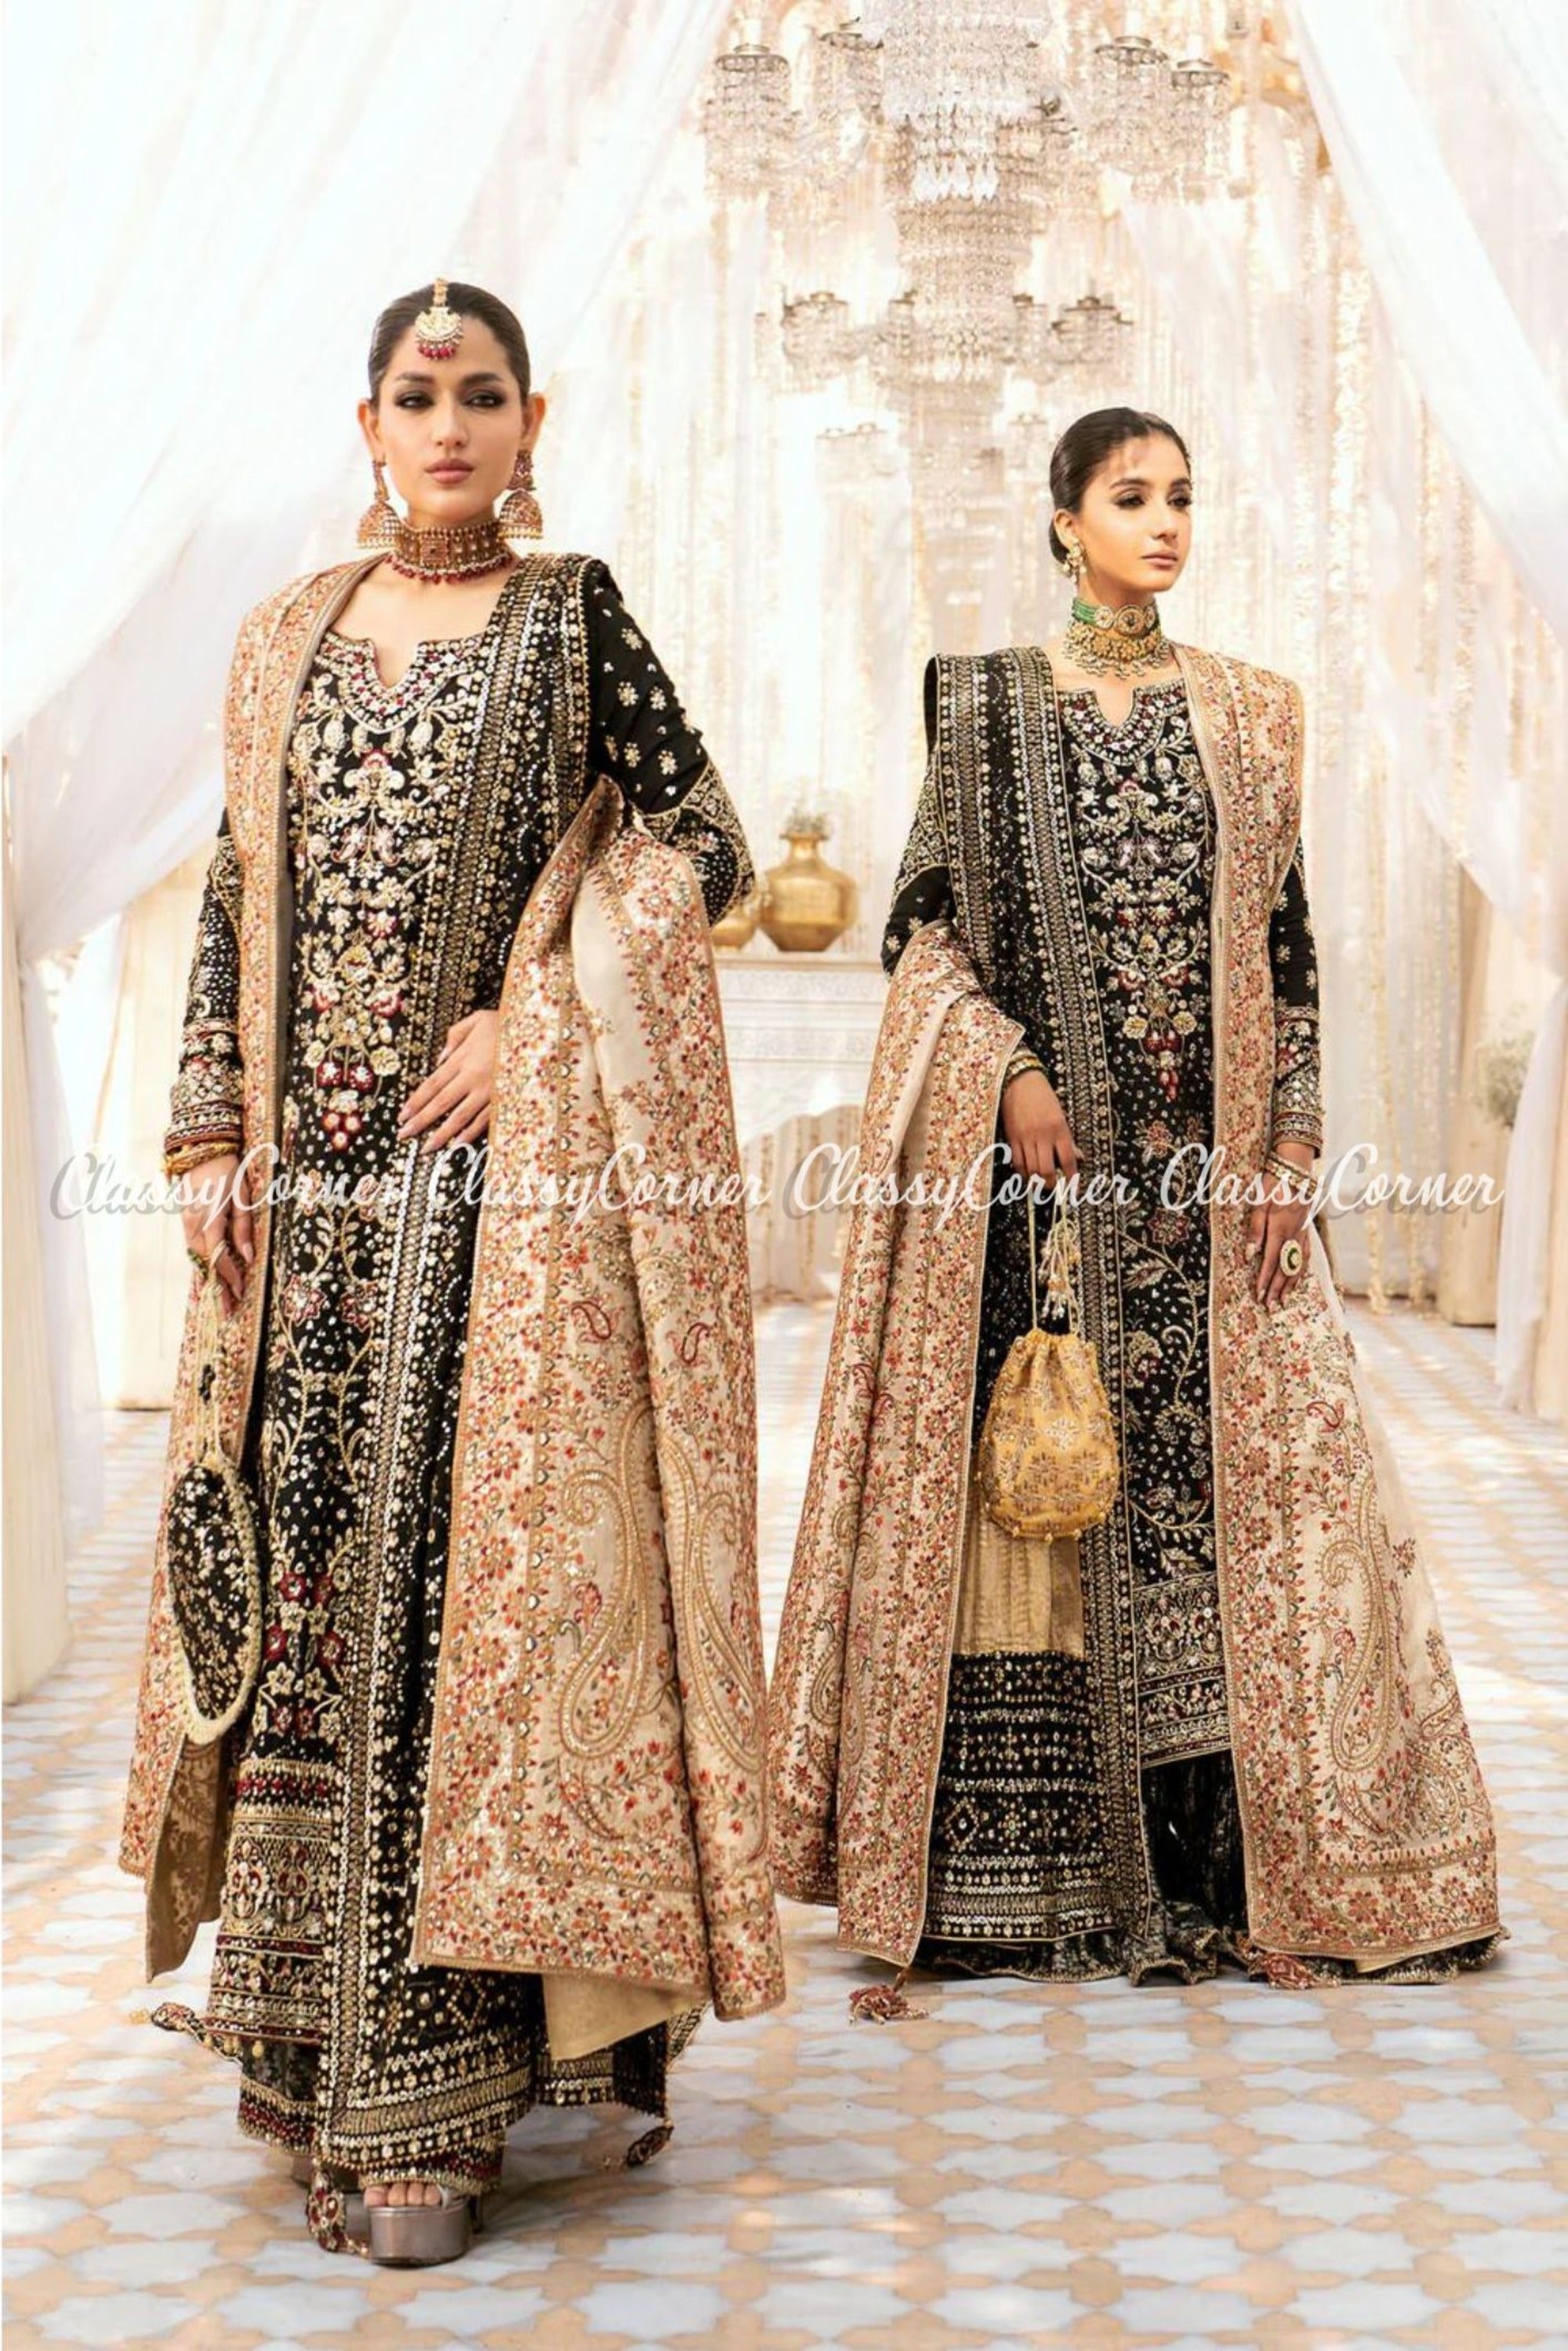 Pakistani wedding outfits for women